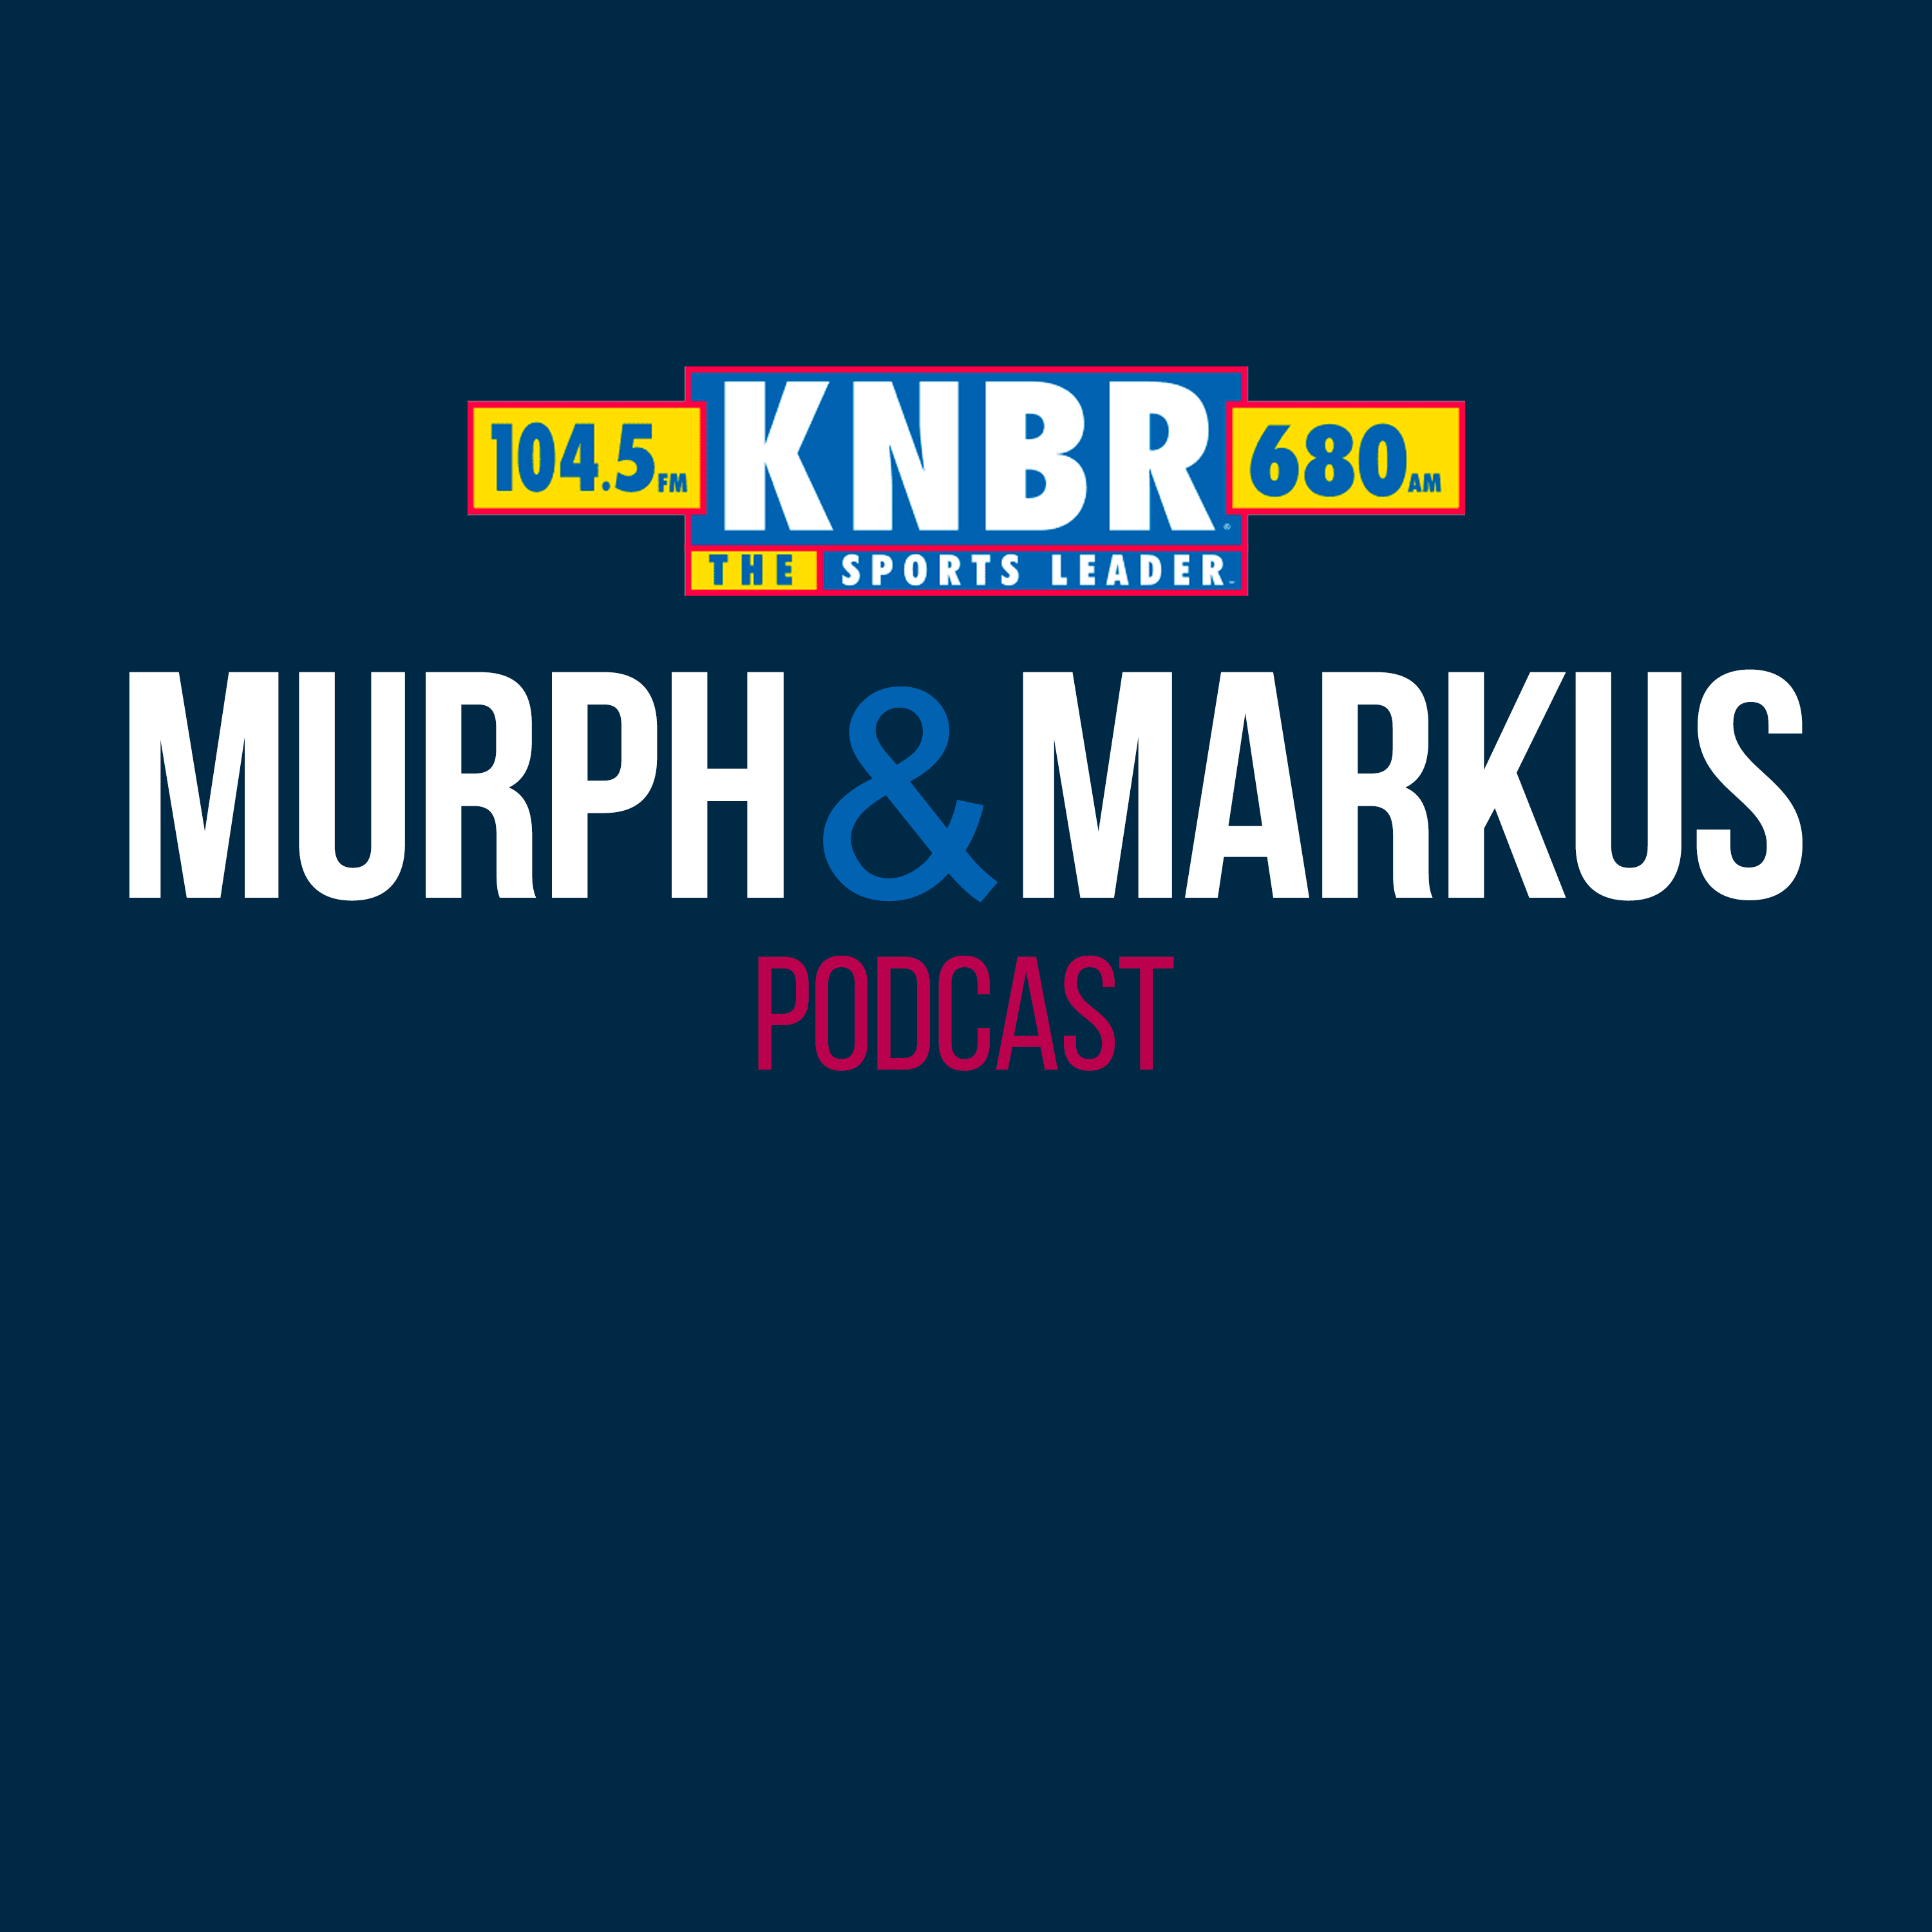 6-10 NBA Insider for KNBR, Marc Spears stops by the show to share his thoughts on the NBA Finals and if the series is already over